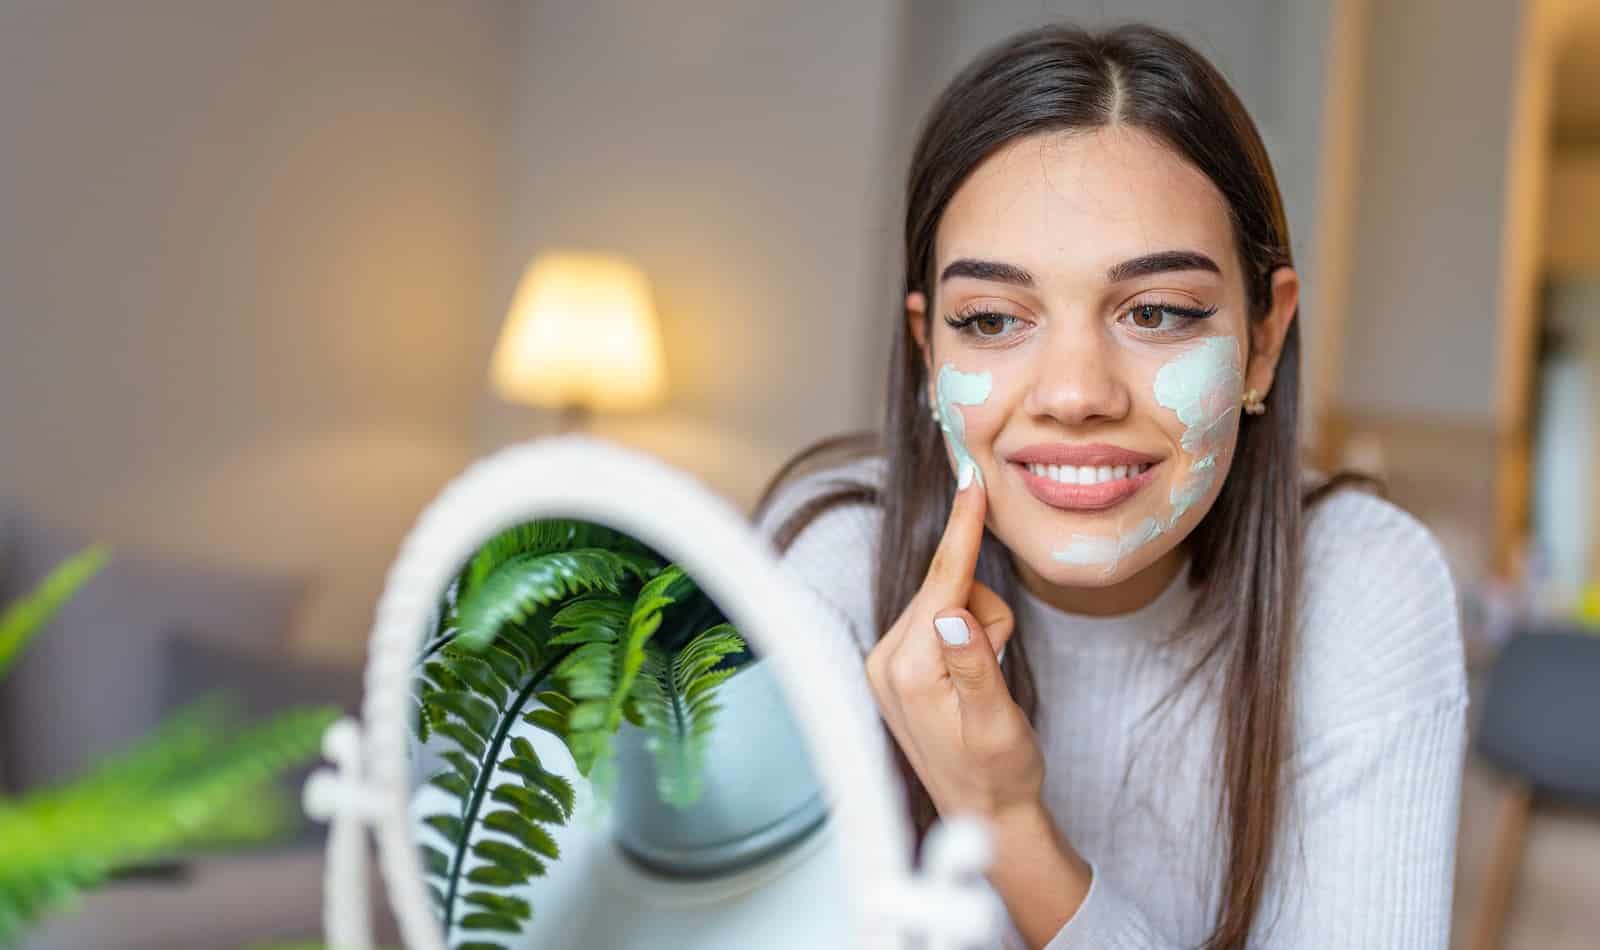 Kaolin clay face masks are among the best at-home beauty products-gentle, yet a great detoxifier! Check out some DIY and store-bought ideas to try!